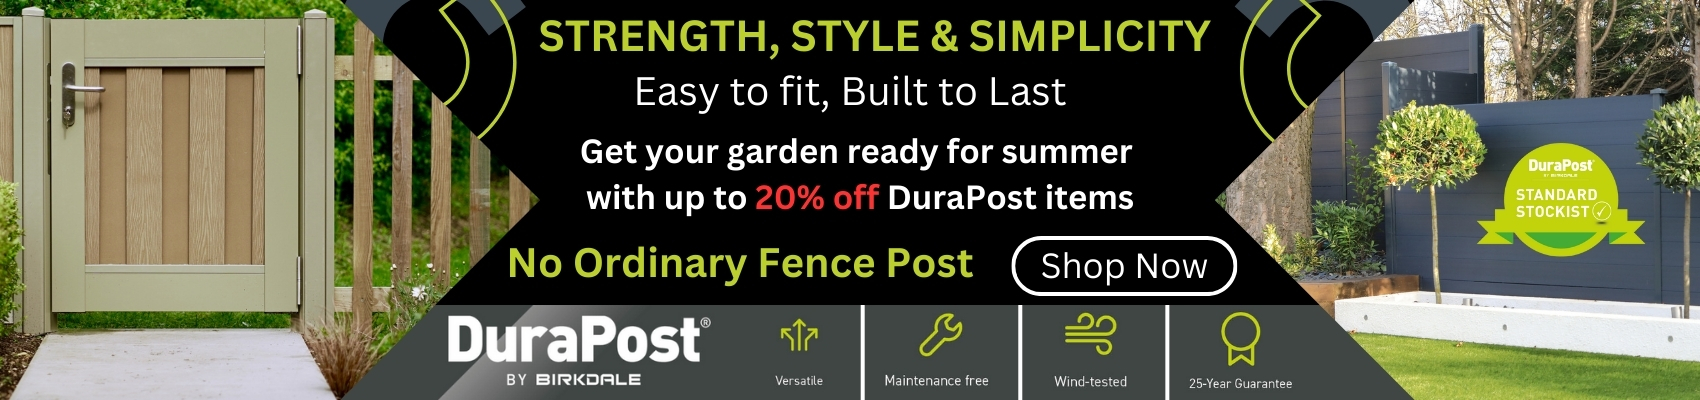 DuraPost sale up to 20% off